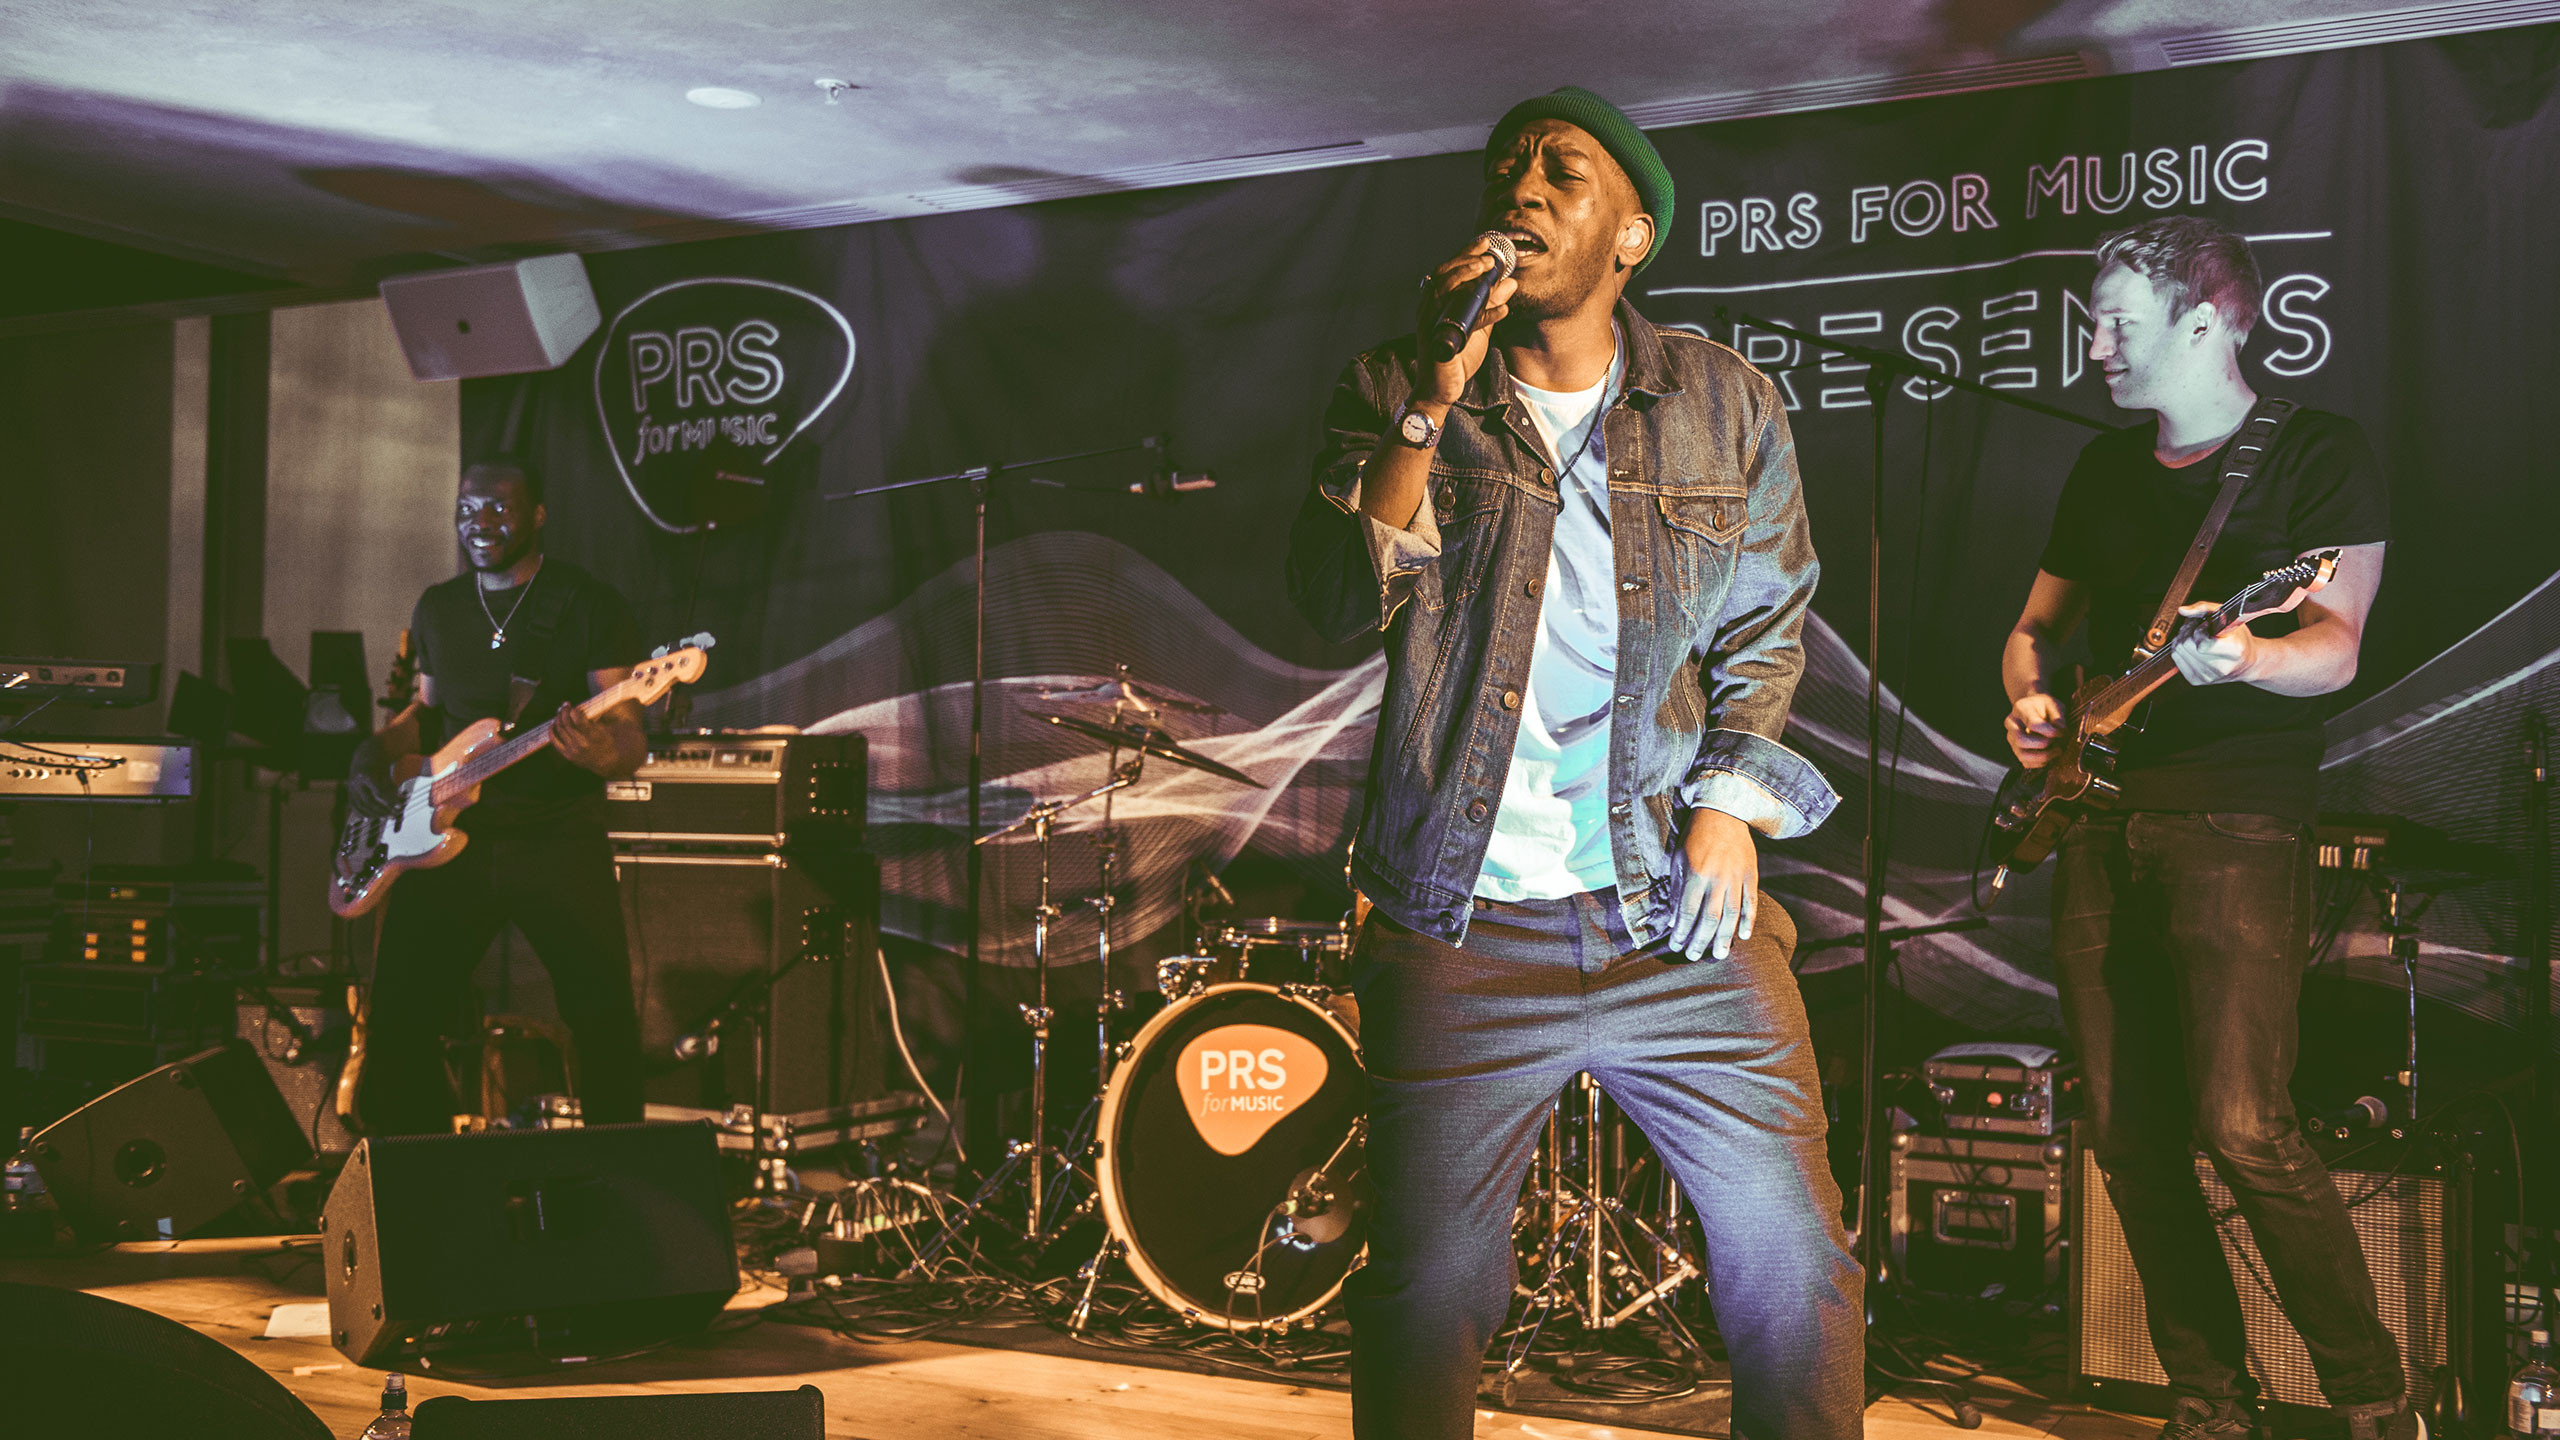 Tiggs Da Author performs with his live band at PRS Presents